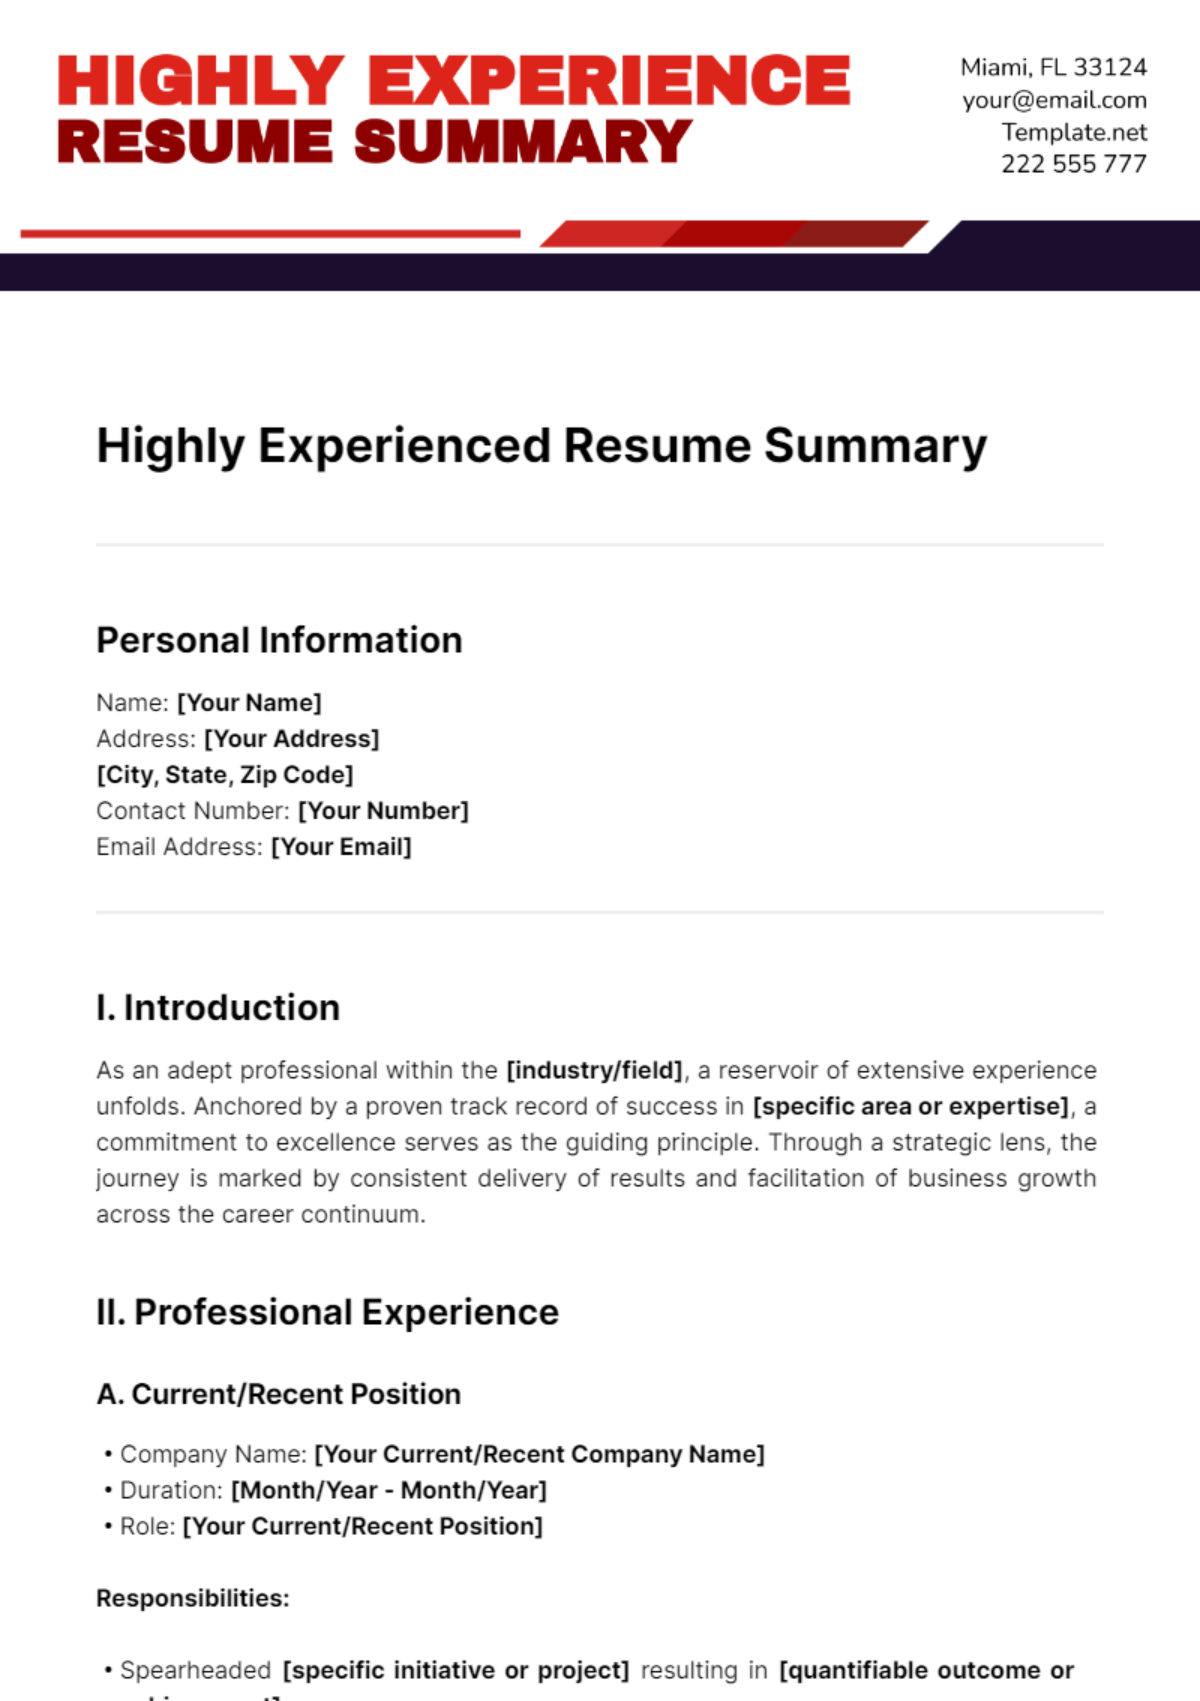 Highly Experienced Resume Summary Template